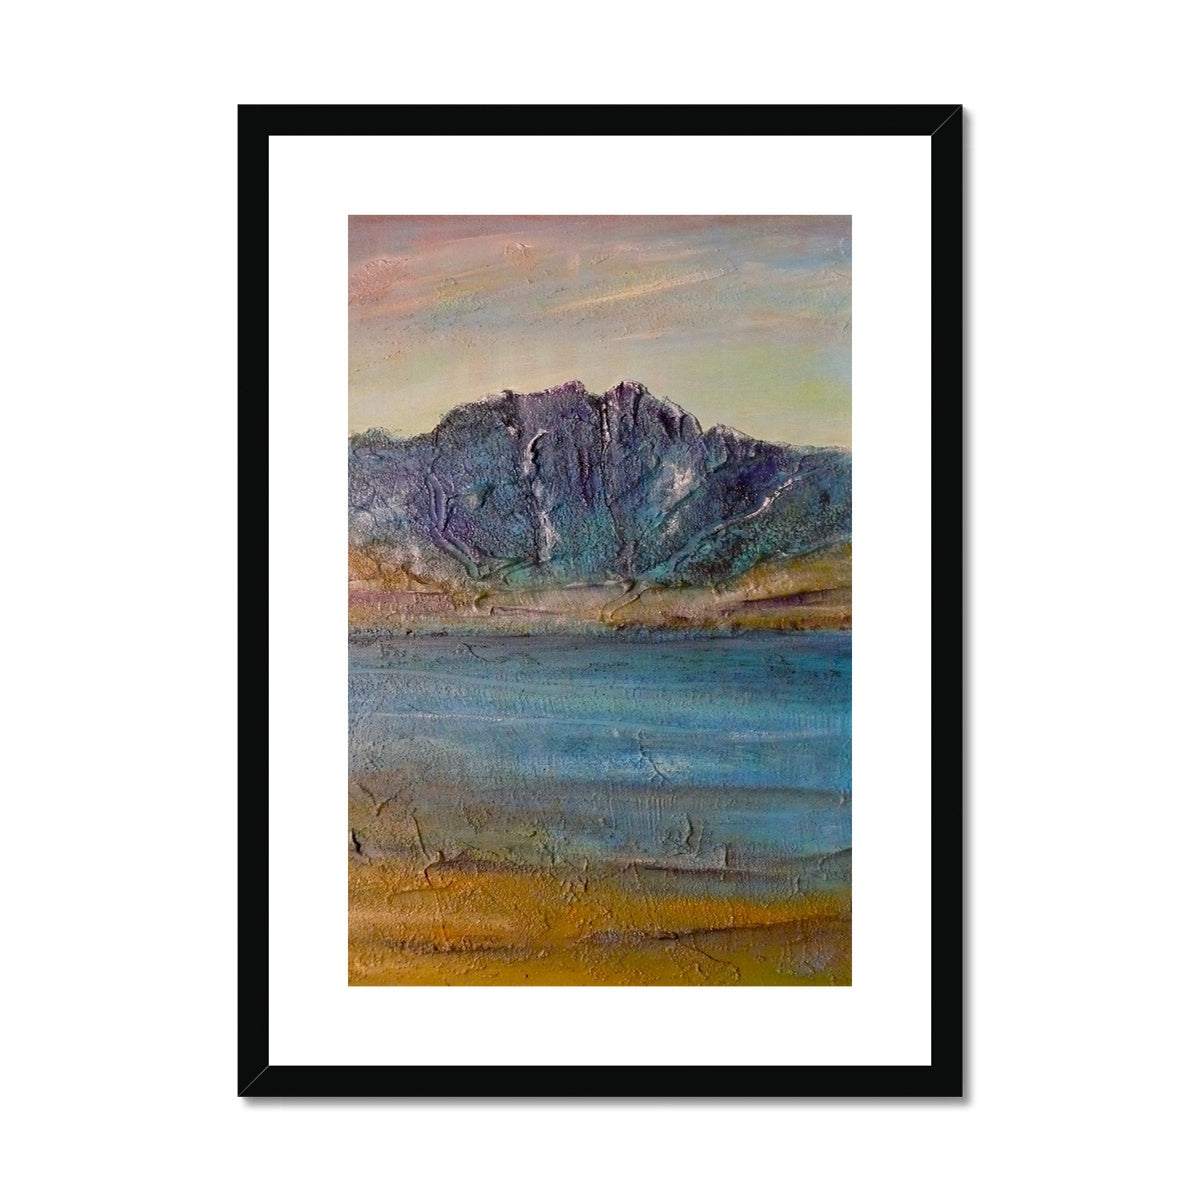 Torridon Painting | Framed & Mounted Prints From Scotland-Framed & Mounted Prints-Scottish Lochs & Mountains Art Gallery-A2 Portrait-Black Frame-Paintings, Prints, Homeware, Art Gifts From Scotland By Scottish Artist Kevin Hunter